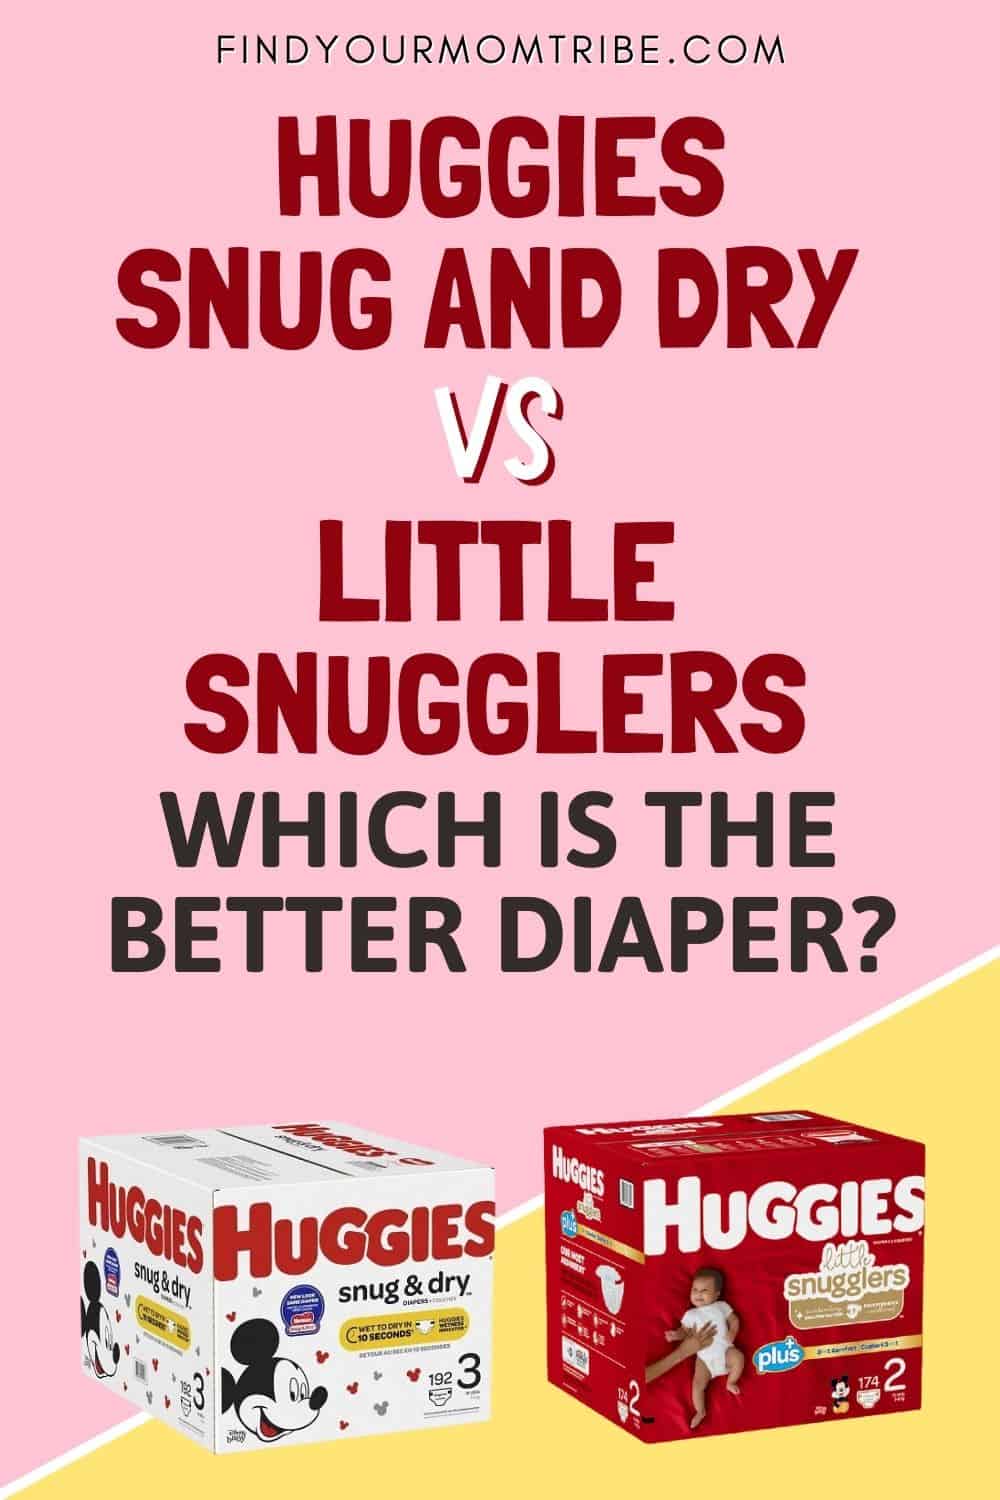 Huggies Snug And Dry Vs Little Snugglers Which Is The Better Diaper 9213